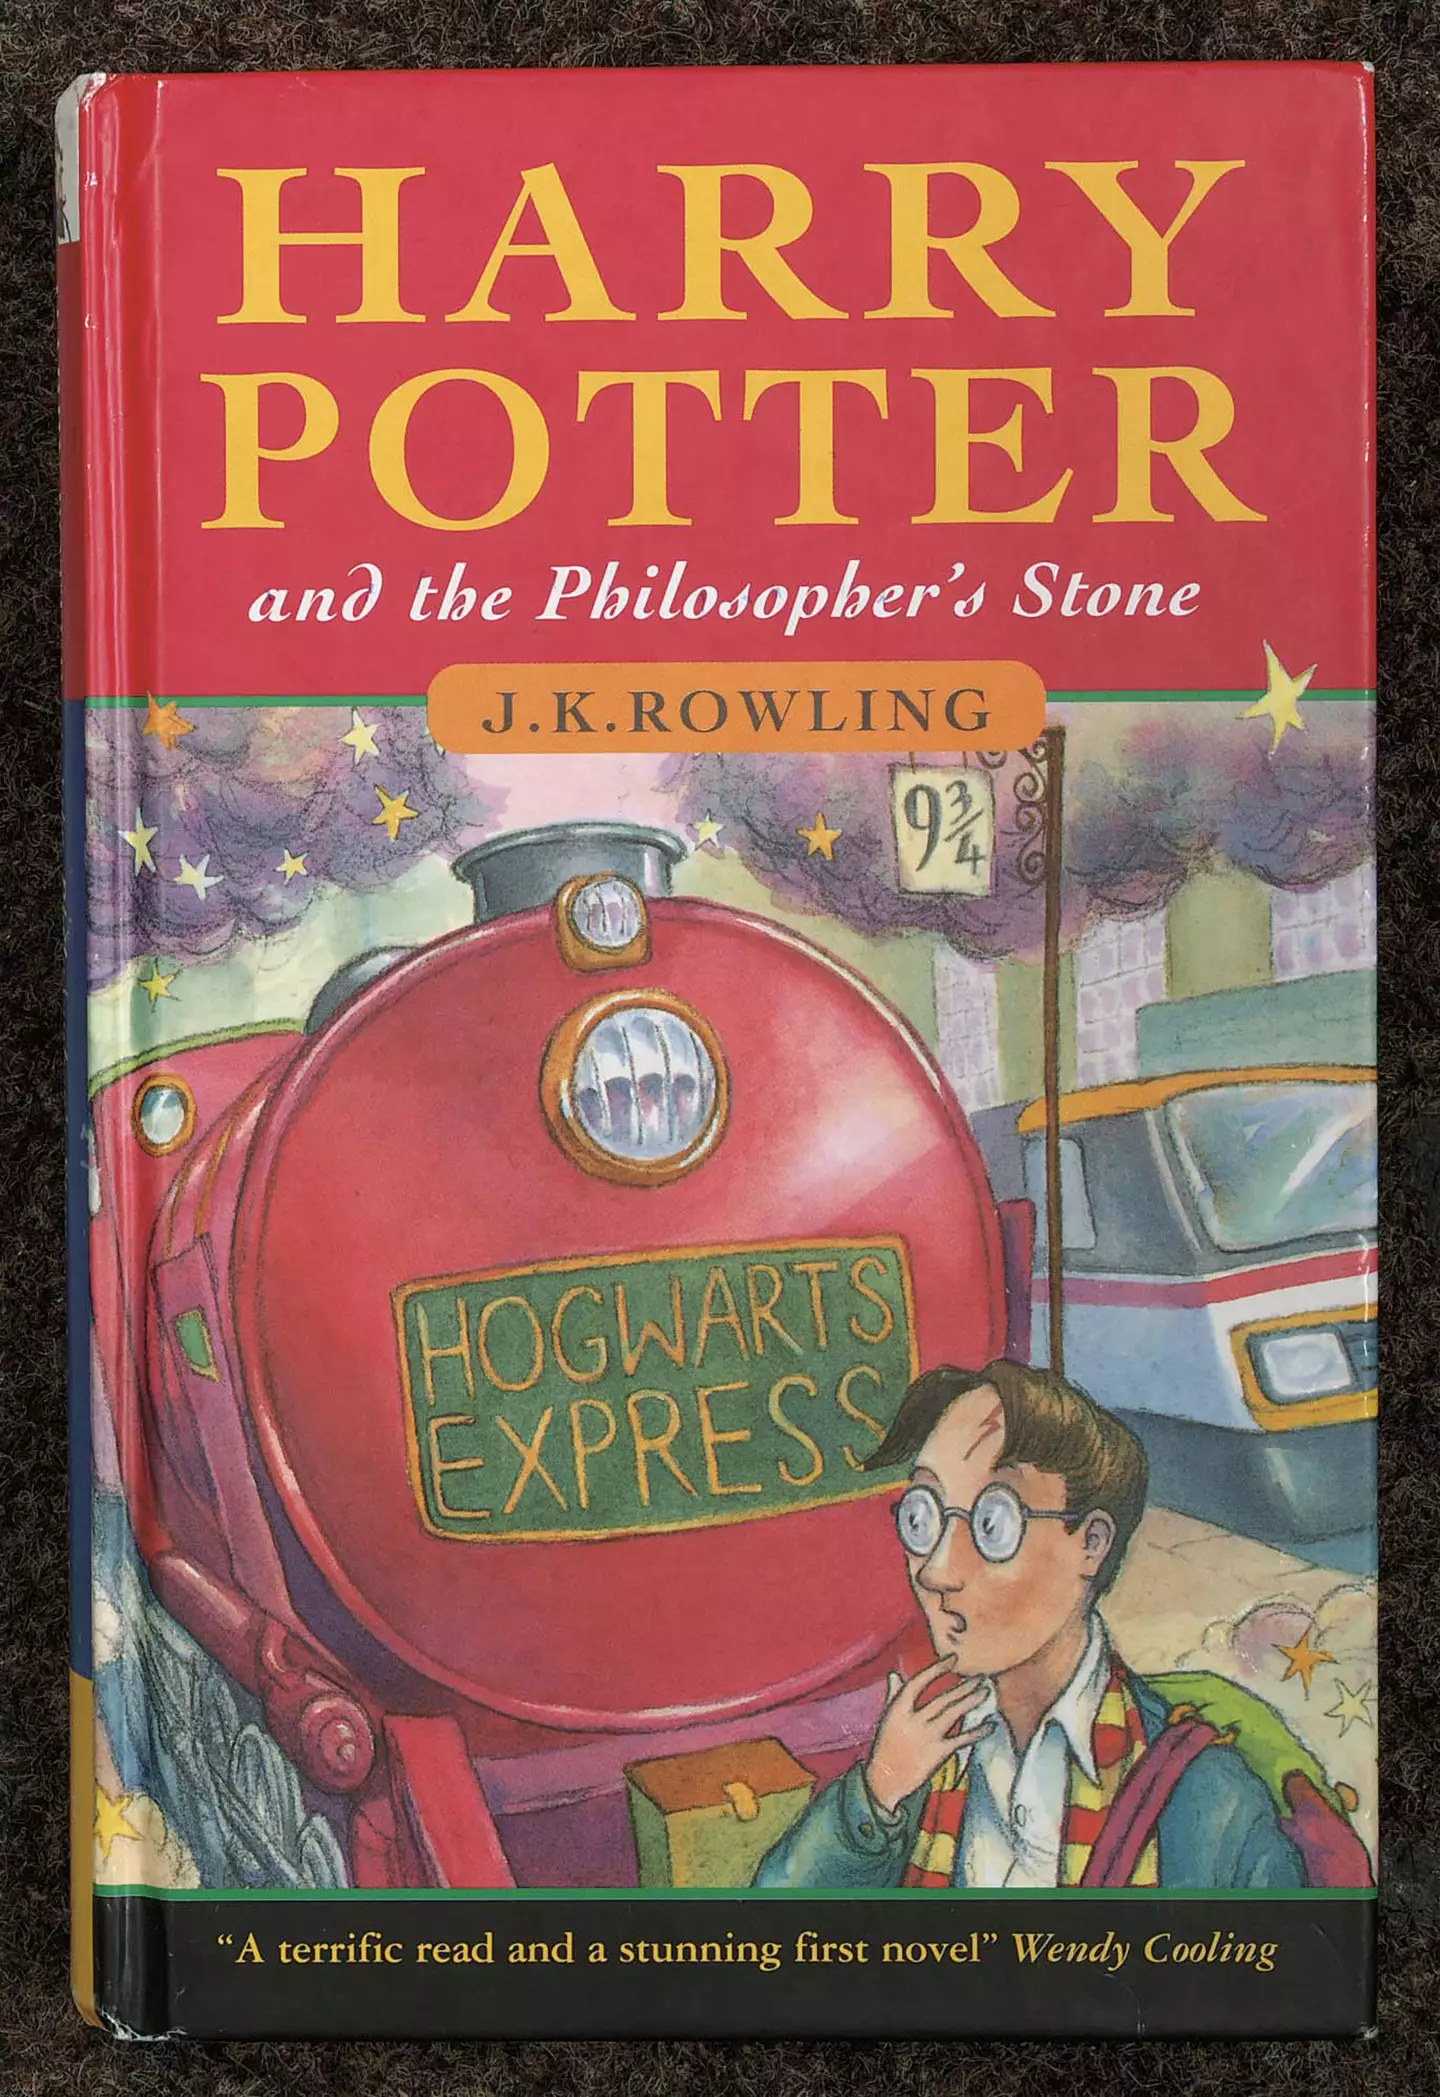 For Brits, it's Harry Potter and the Philosopher's Stone - but not for Americans.